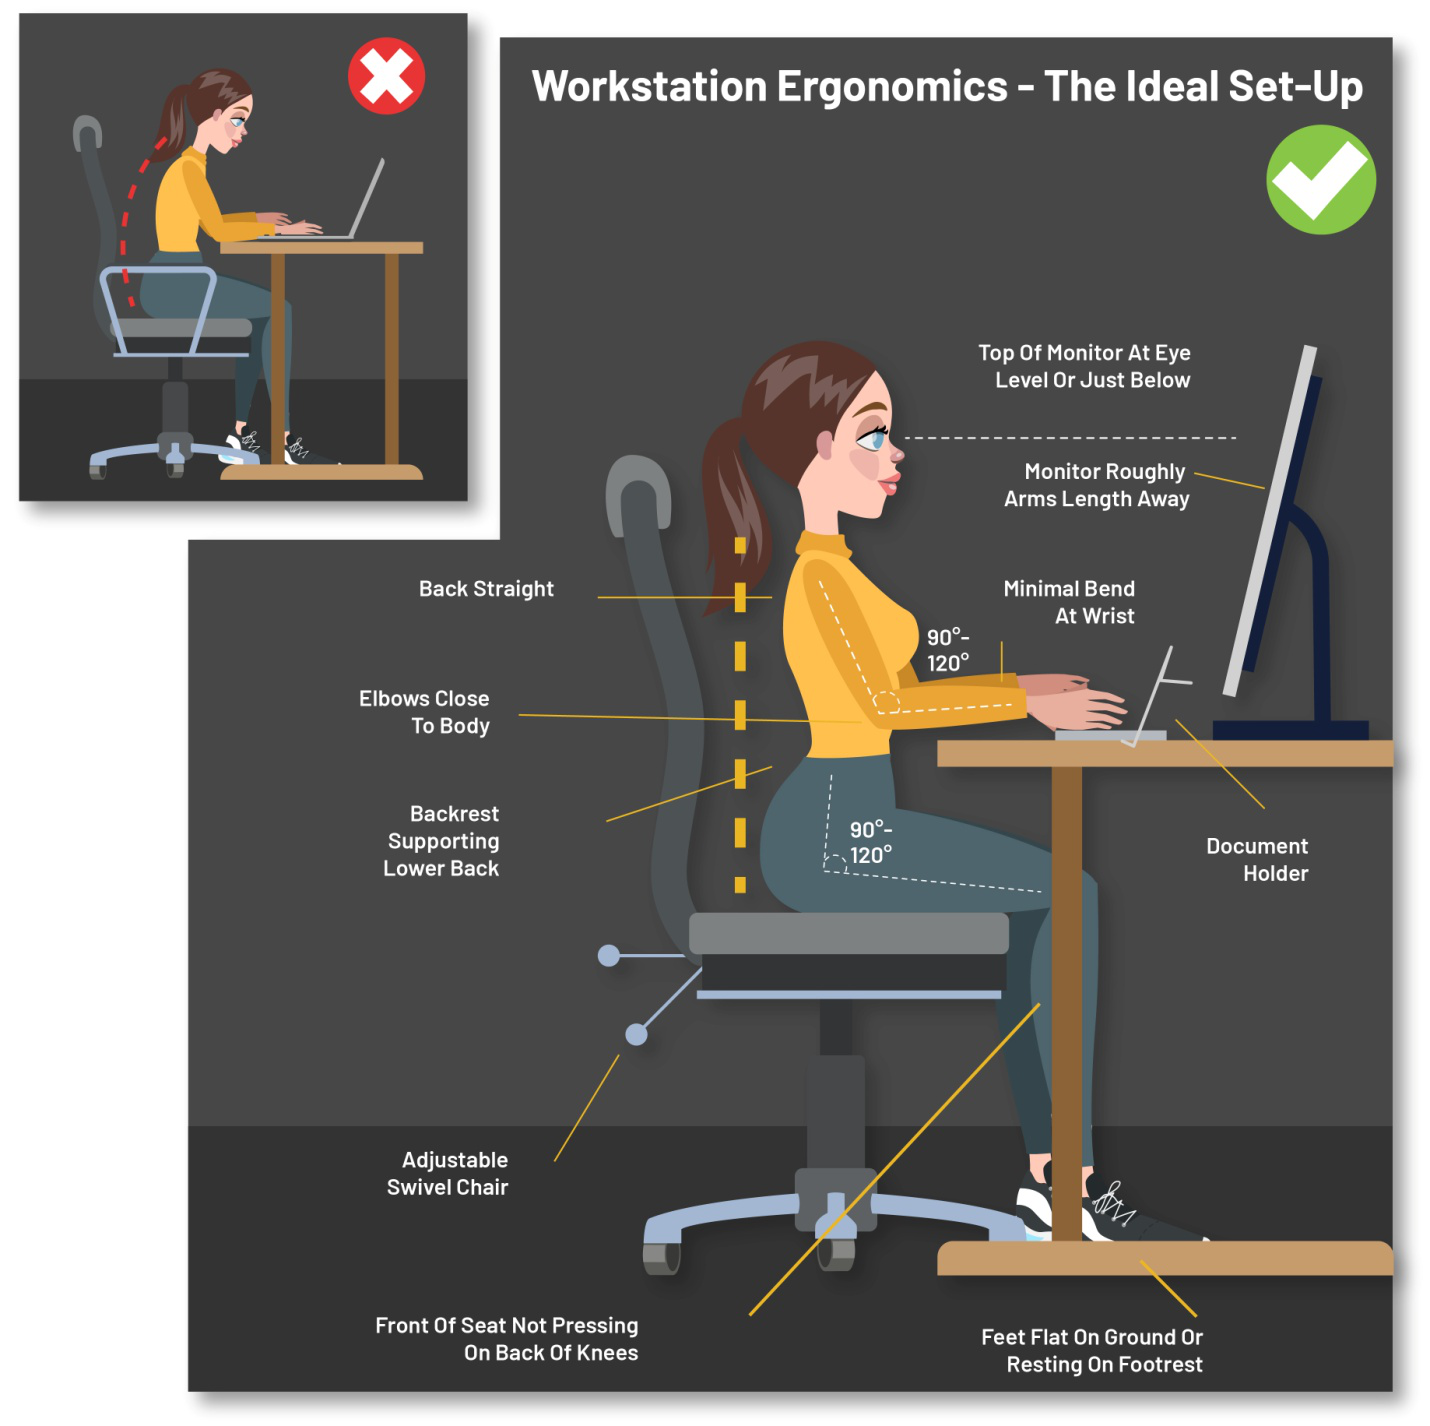 An infographic showing the ideal setup for work